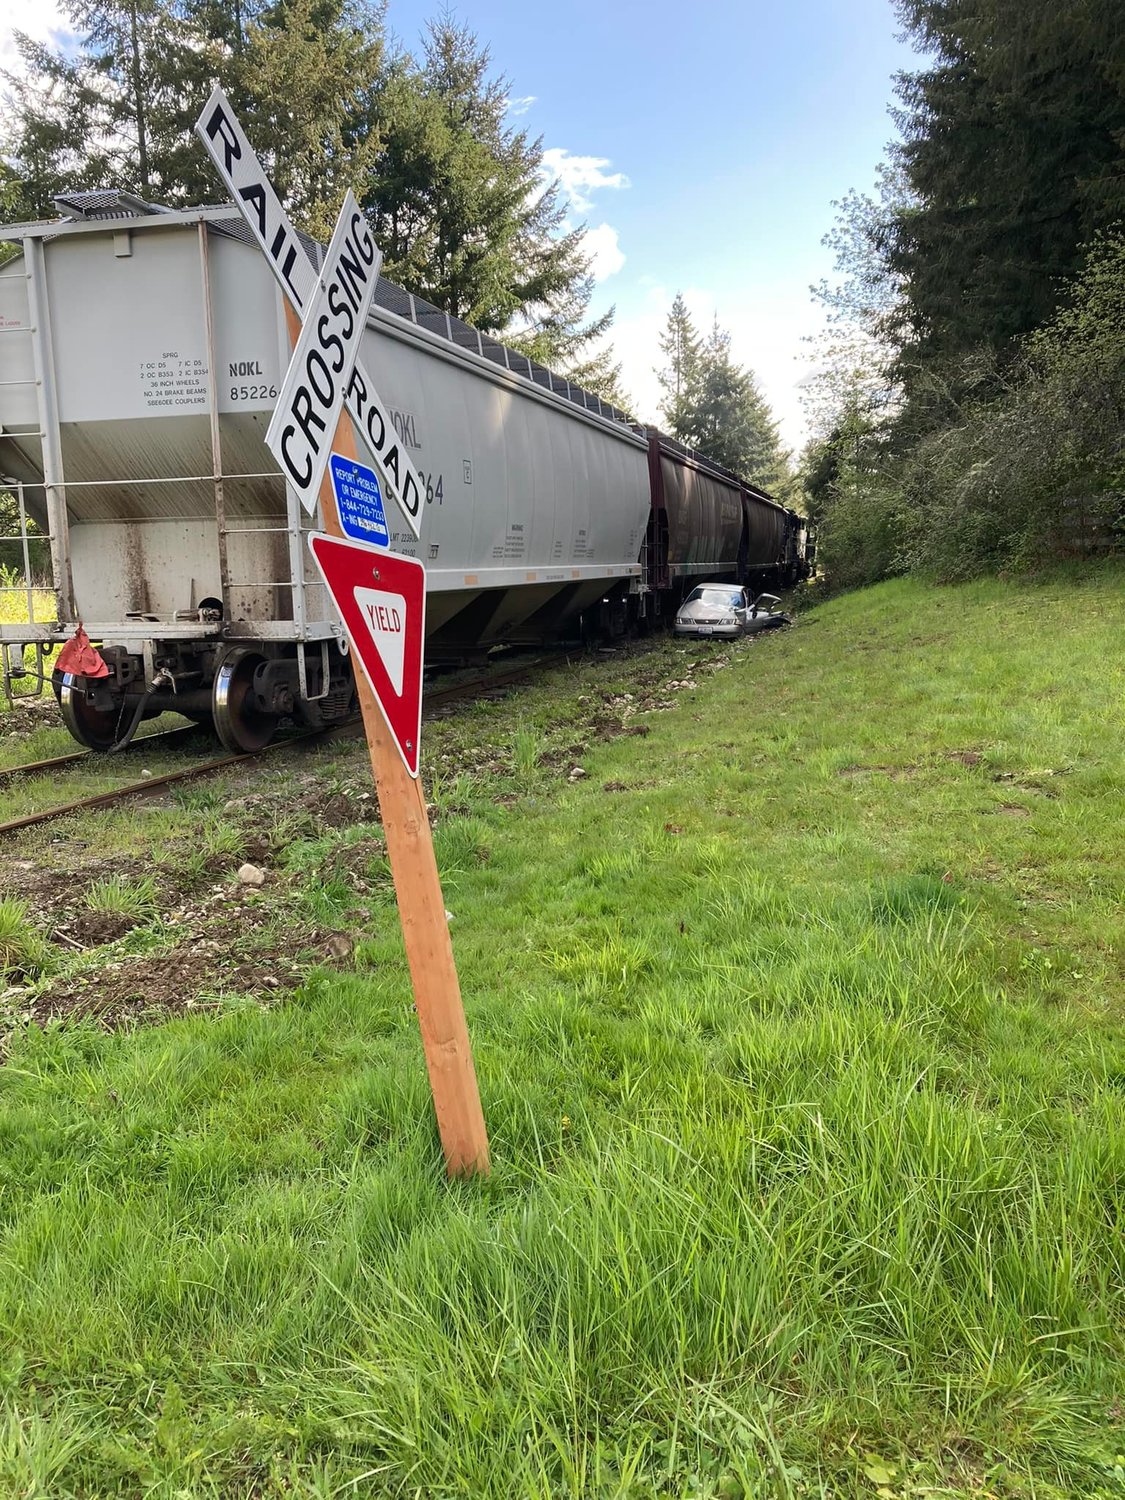 A train versus vehicle collision was reported in Rainier on May 10.